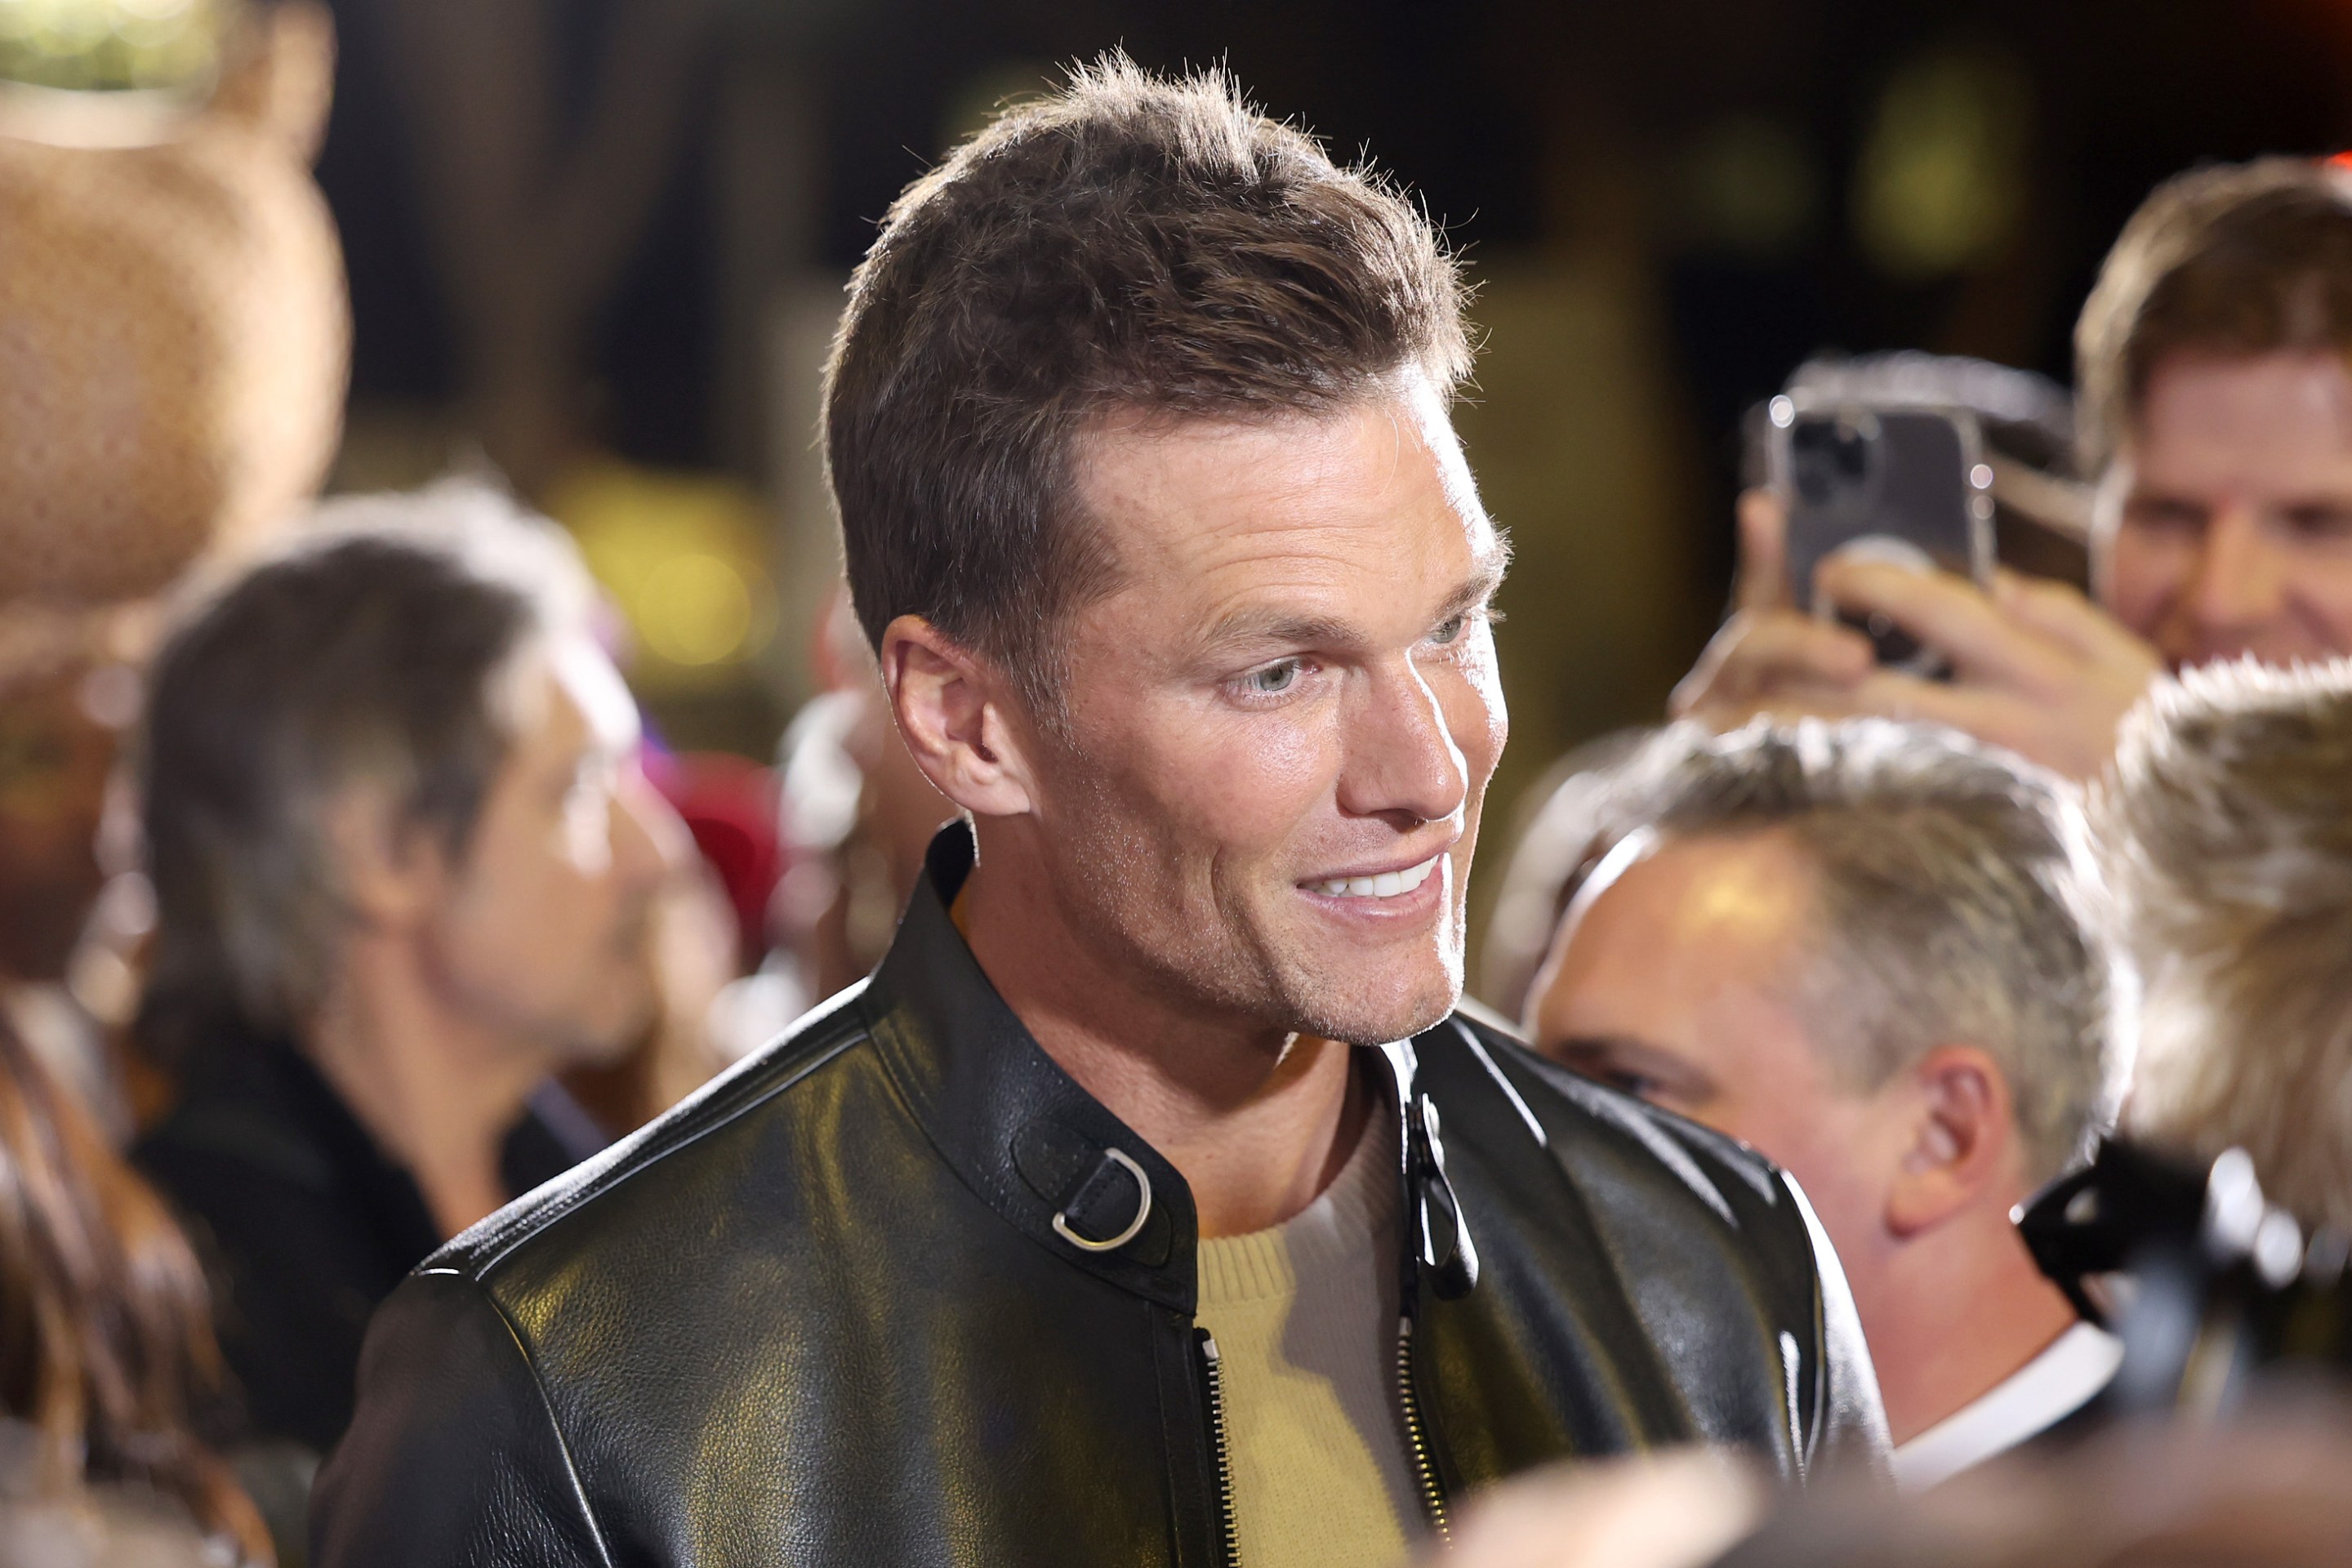 LOS ANGELES, CALIFORNIA - JANUARY 31: Tom Brady attends the Los Angeles Premiere of Paramount Pictures’ “80 For Brady” presented by Smirnoff ICE at the Regency Village Theatre on January 31, 2023 in Los Angeles, California. (Photo by Phillip Faraone/Getty Images for Paramount Pictures)